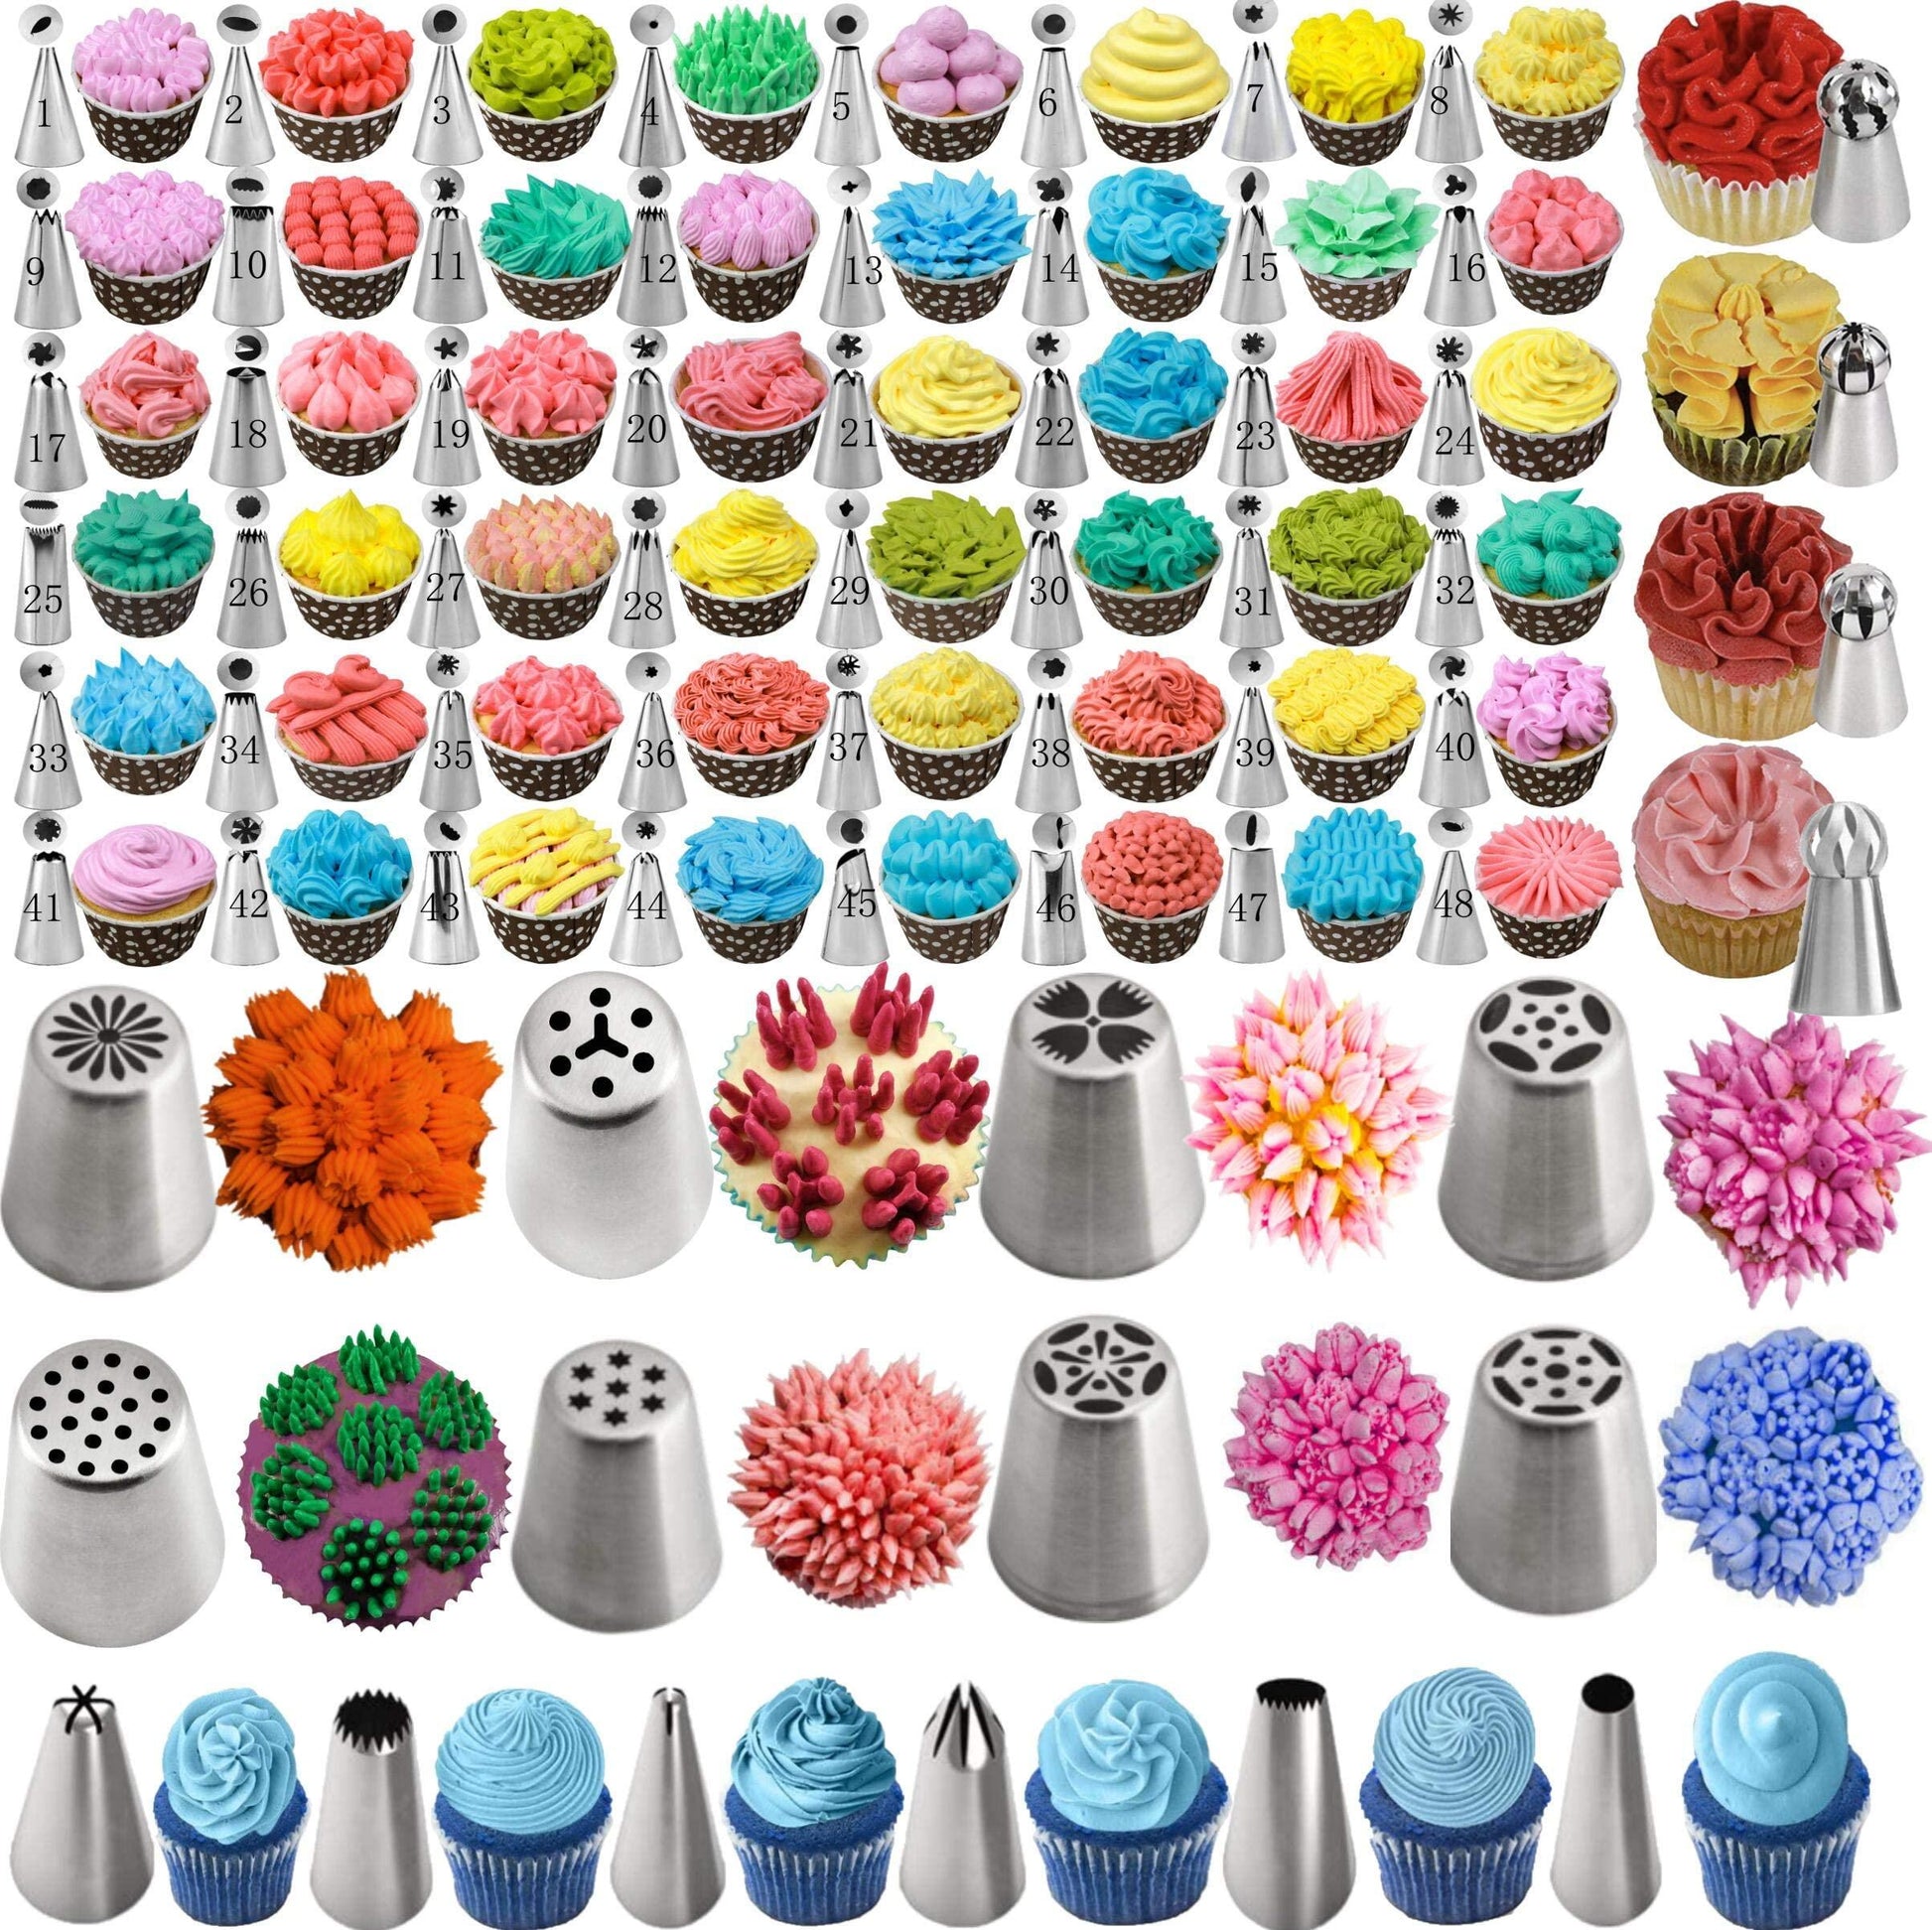 ARNISION 359PCs Cake Decorating Baking Supplies Kit, Baking Set with 66 Piping Tips, Icing Bags and Tips Set for Beginners,Baking Tools,Cupcake Decorating Kit - CookCave